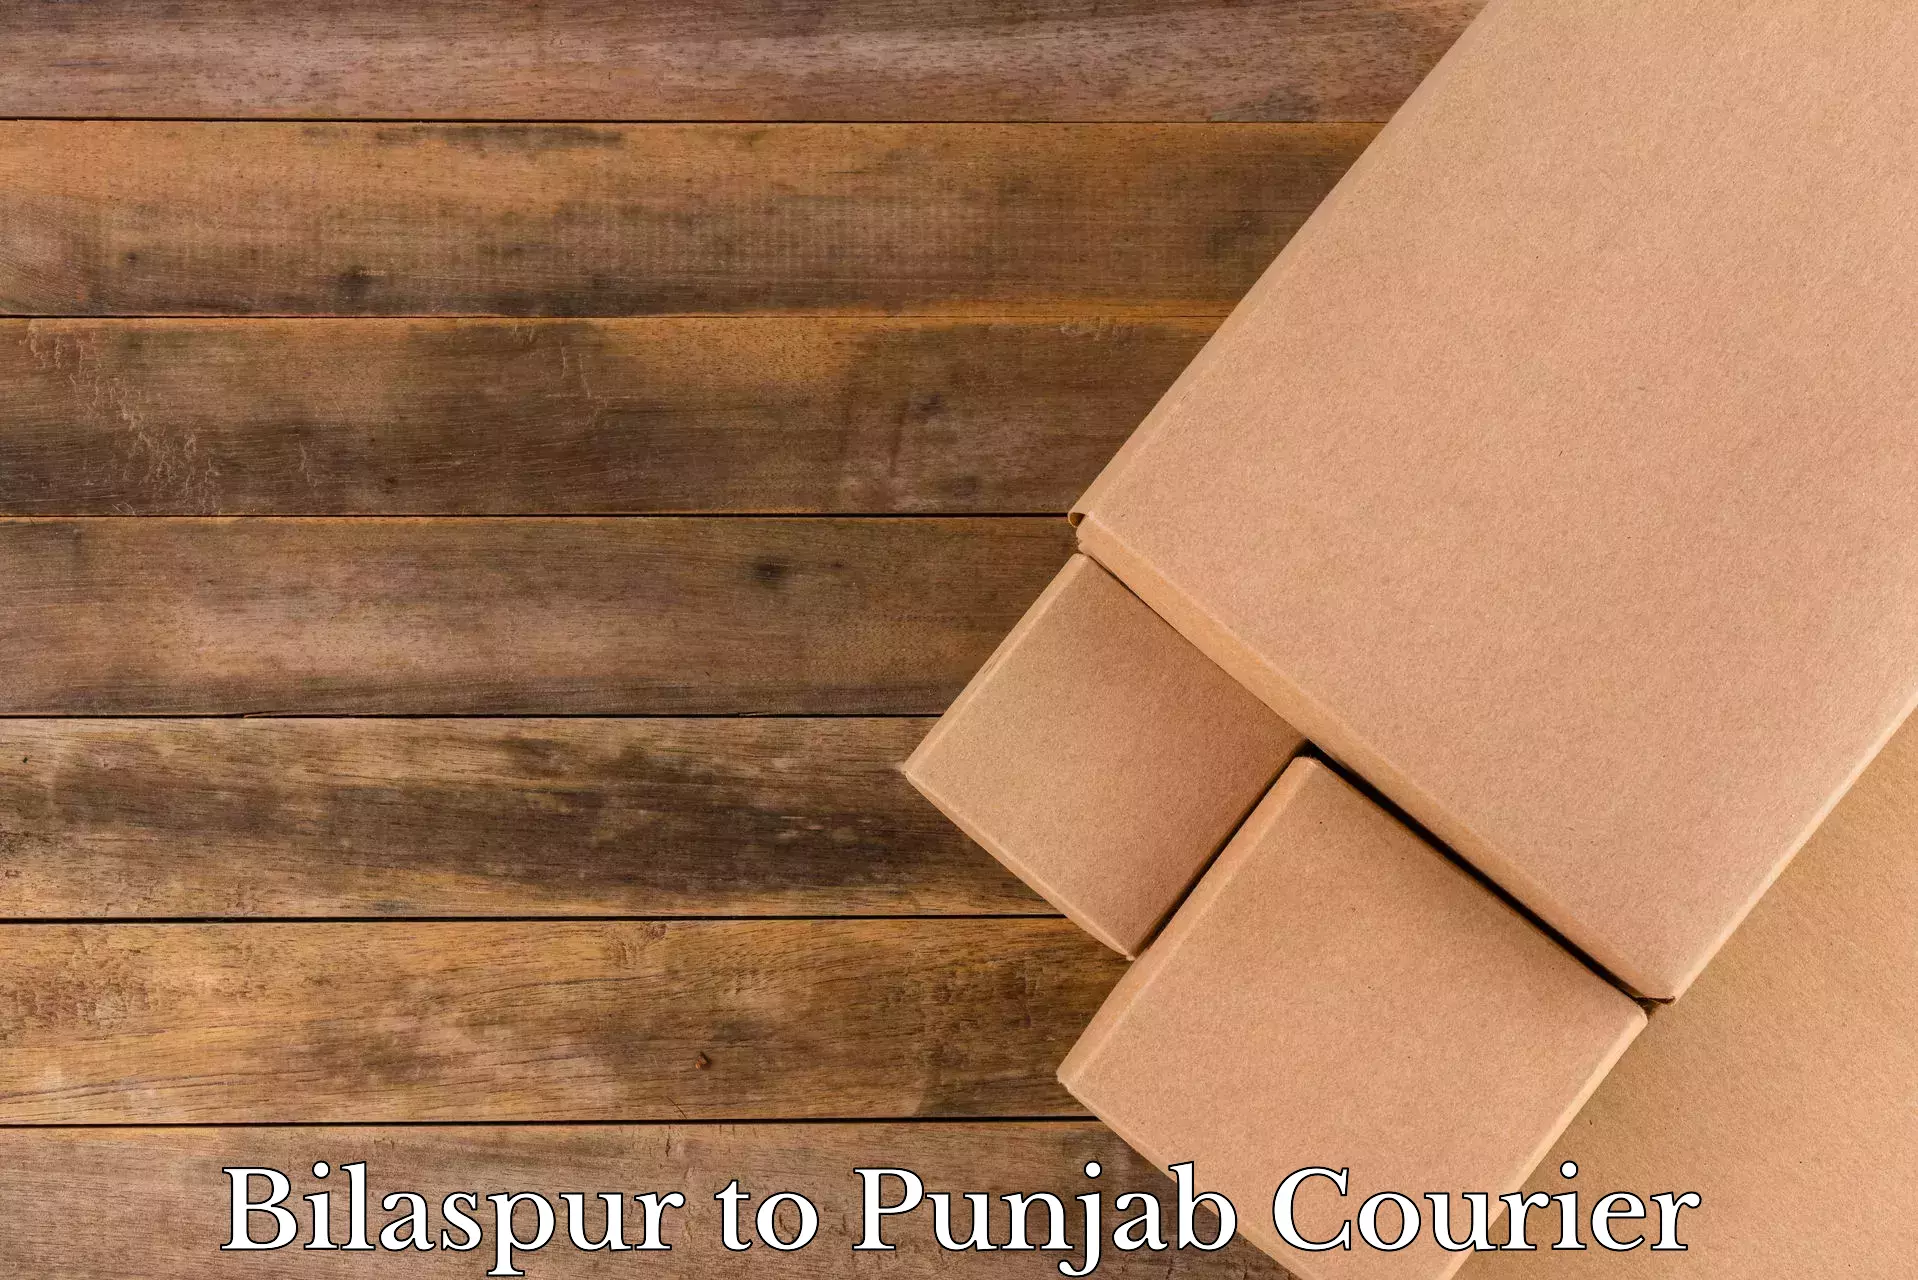 Full-service movers Bilaspur to Patiala